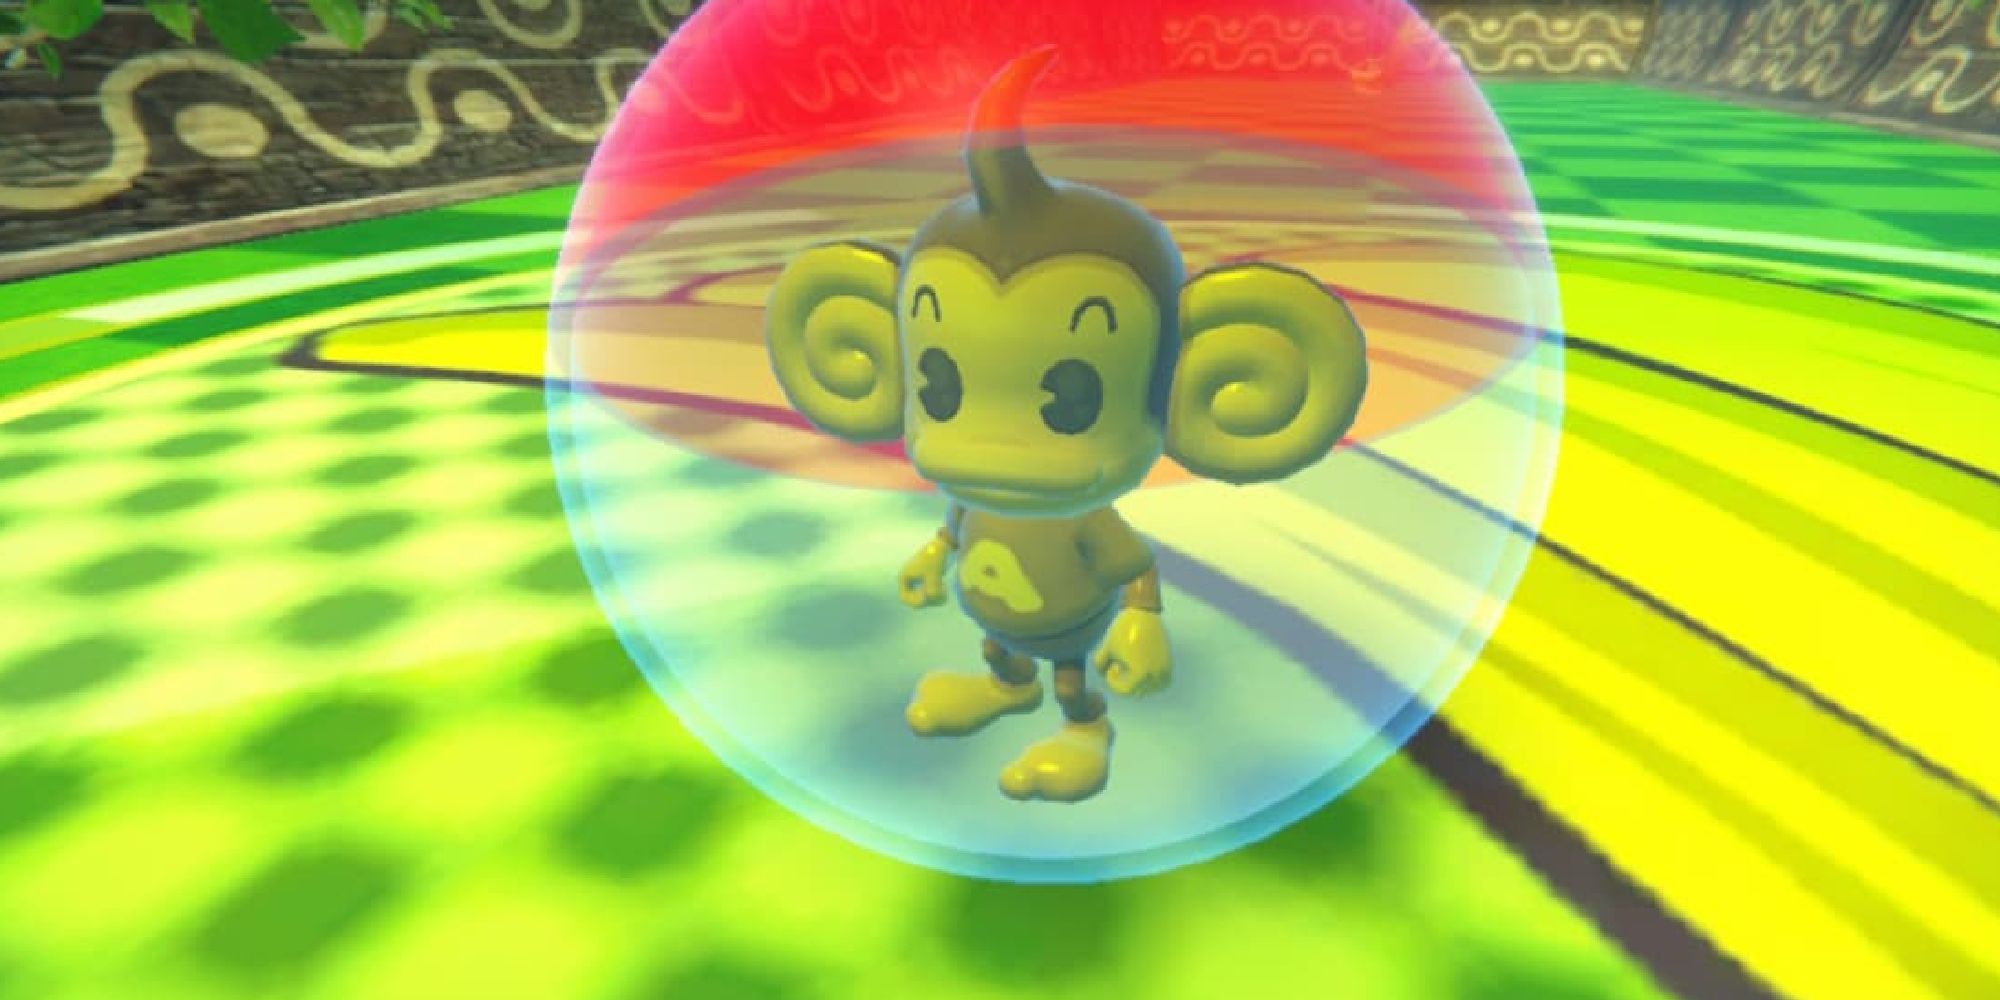 AiAi in a red and blue ball in Super Monkey Ball Banana Mania